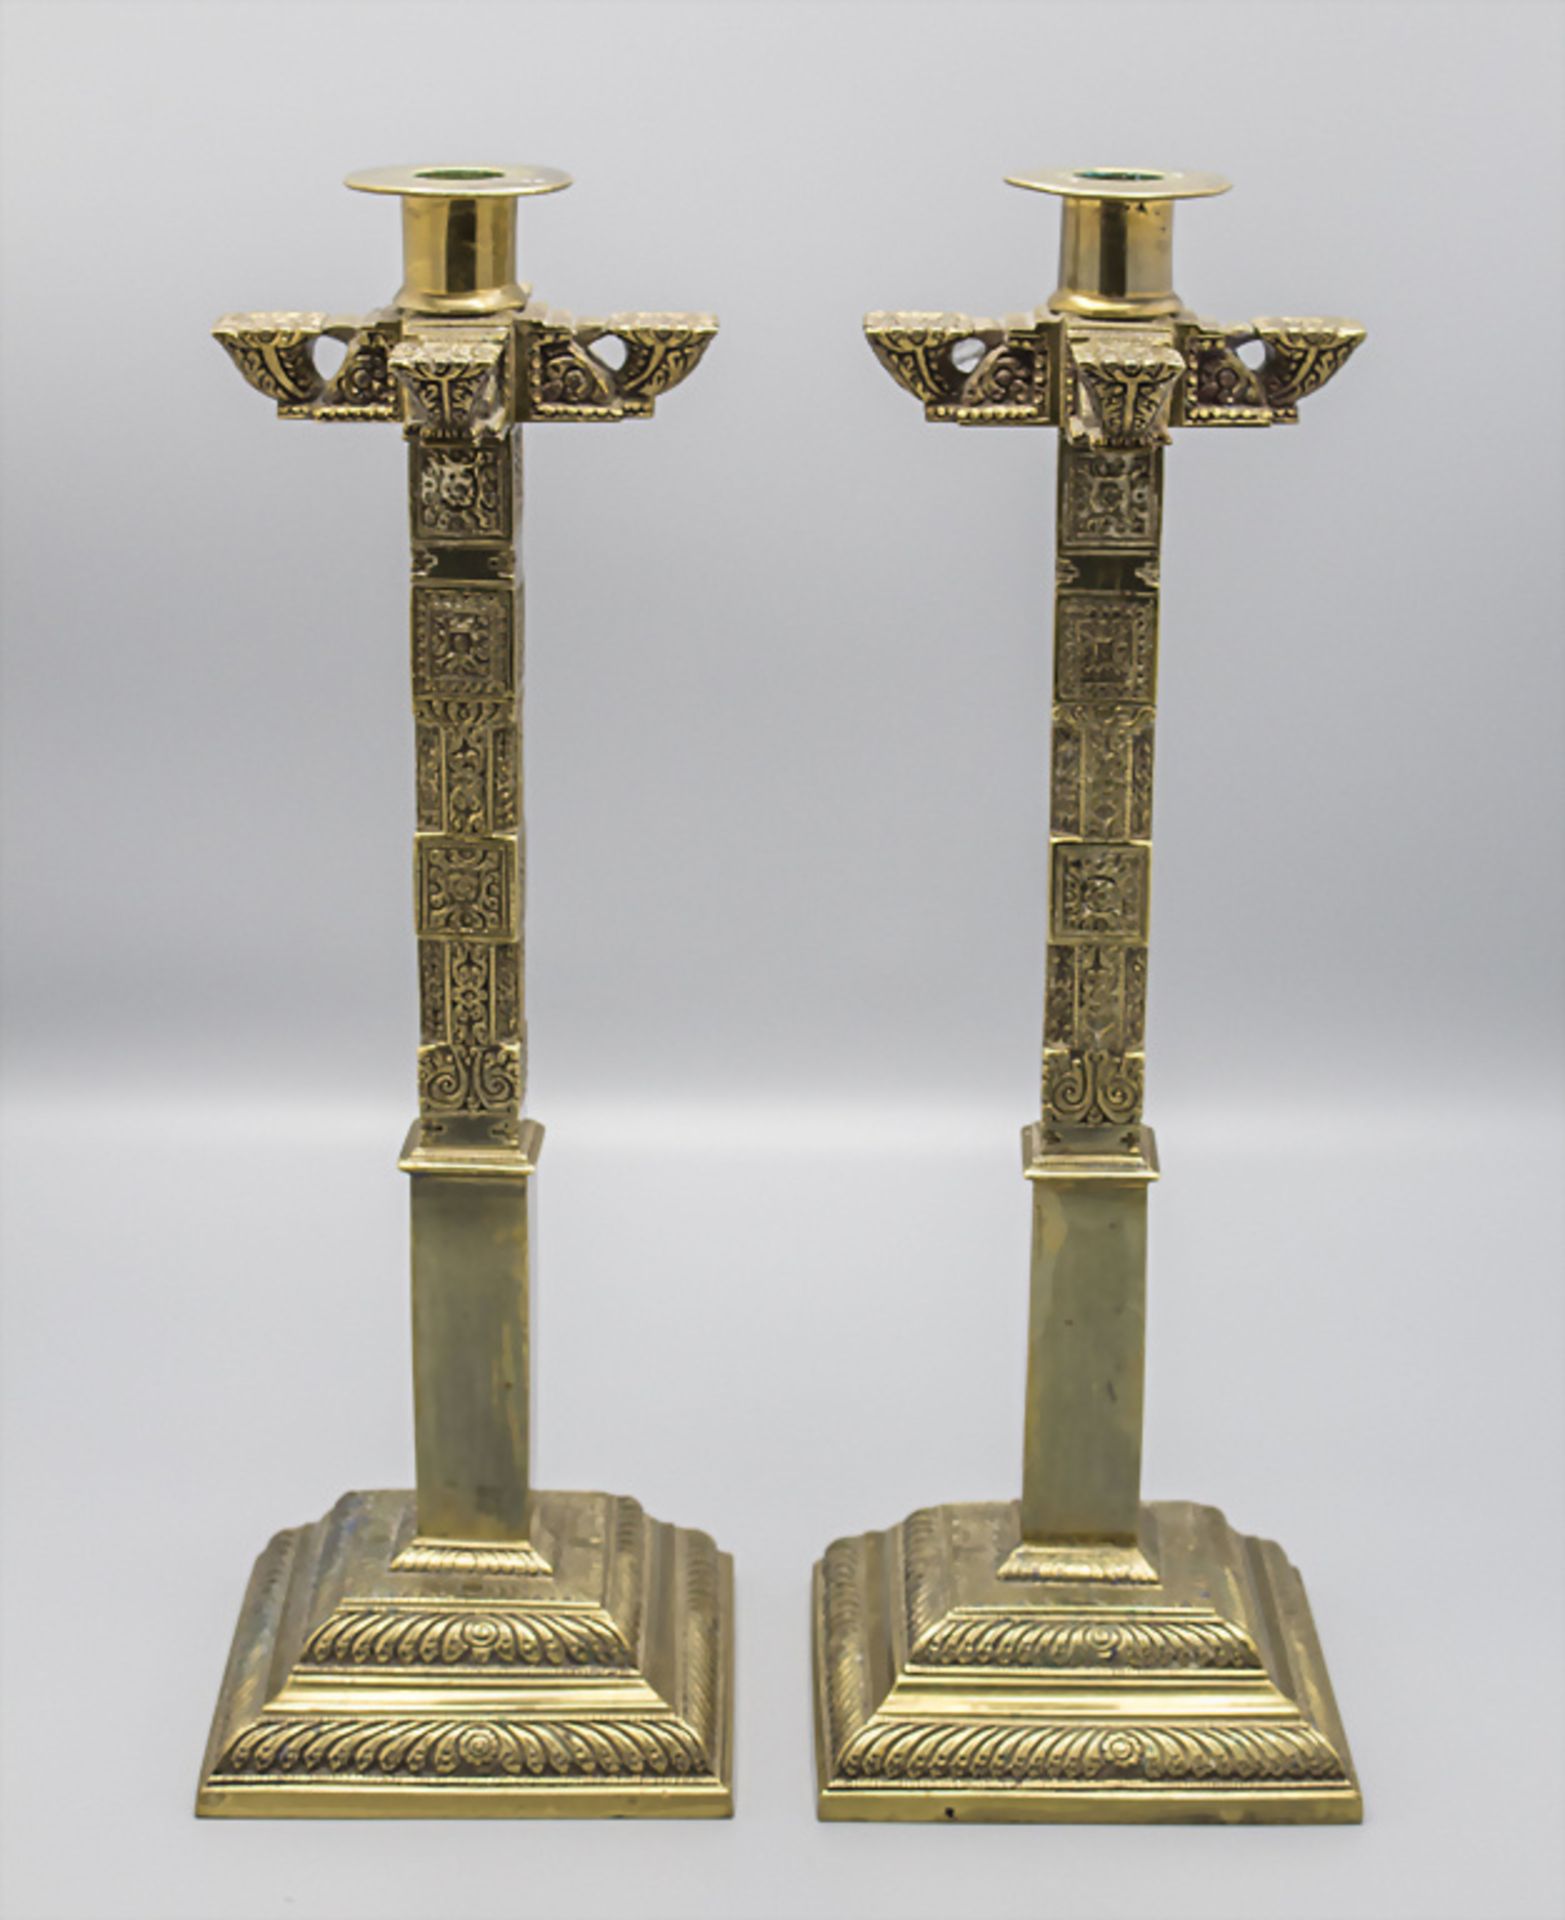 Paar Bronzeleuchter / A pair of bronze candle holders, wohl 19. Jh.